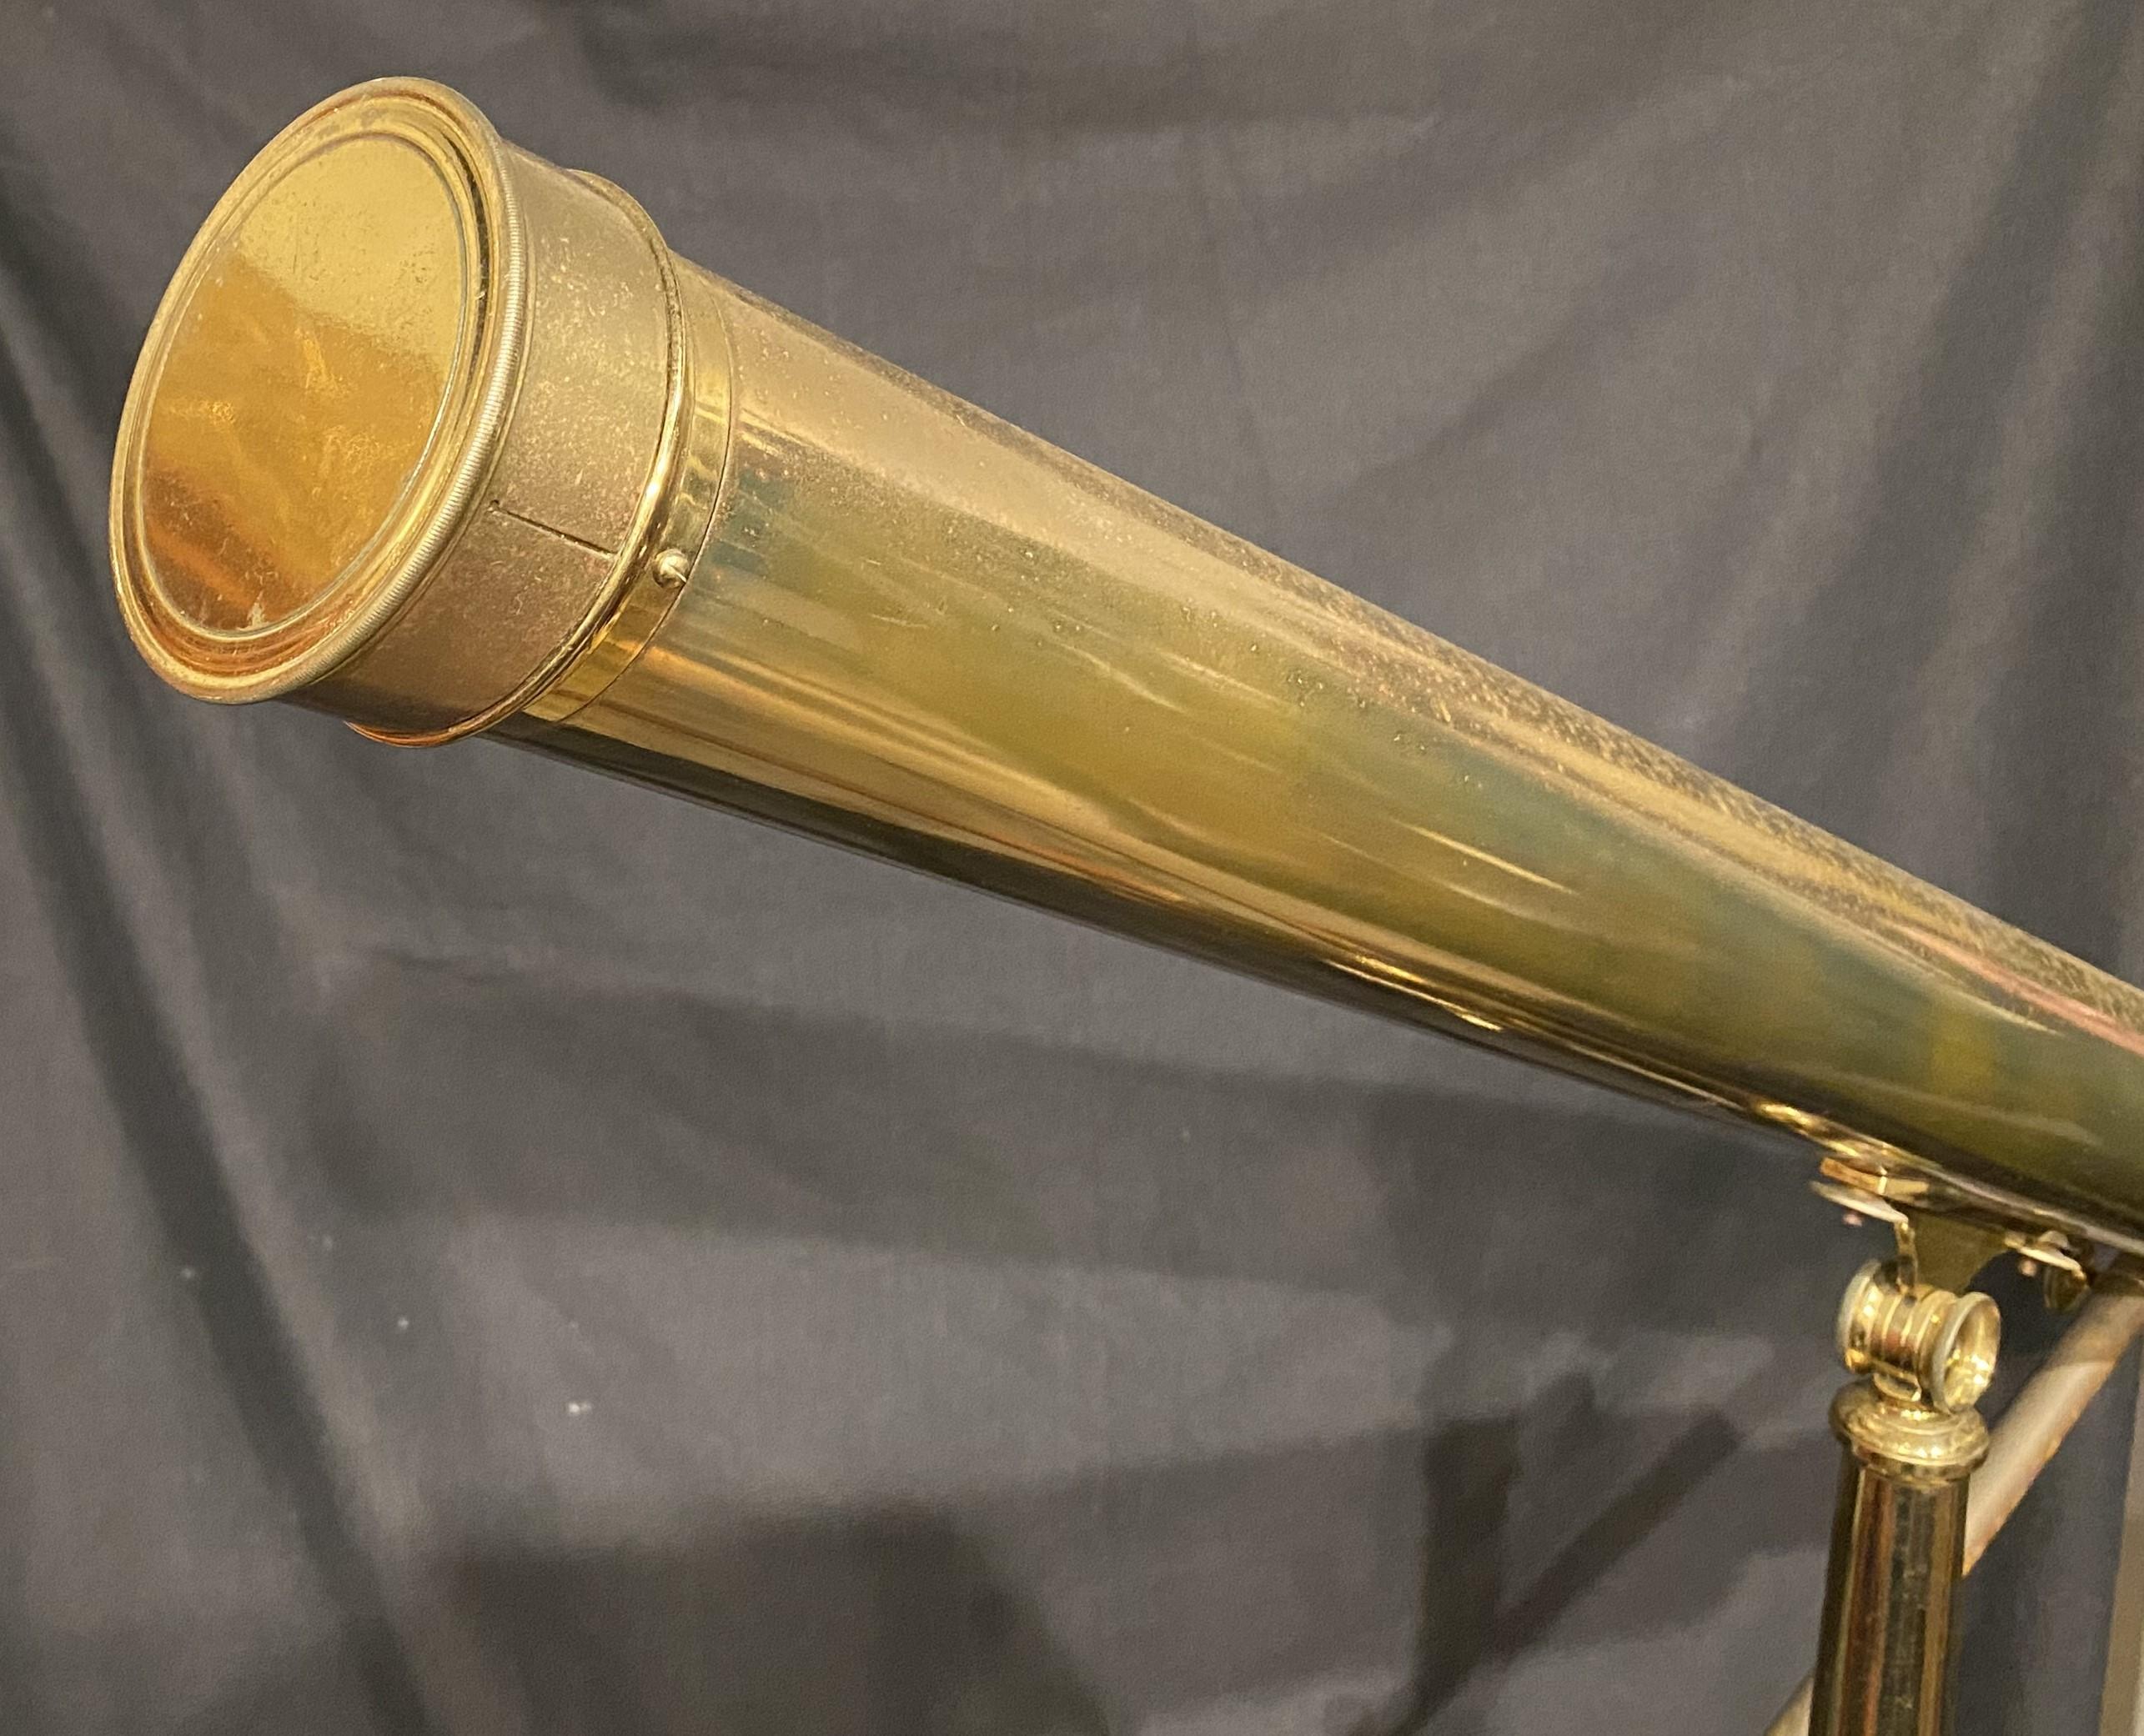 A nice example of a large brass telescope or spyglass on brass & wooden tripod, signed “Hammersley London,” circa late 19th or early 20th century, in very good condition, with some surface pitting on the brass surfaces, and light wear commensurate